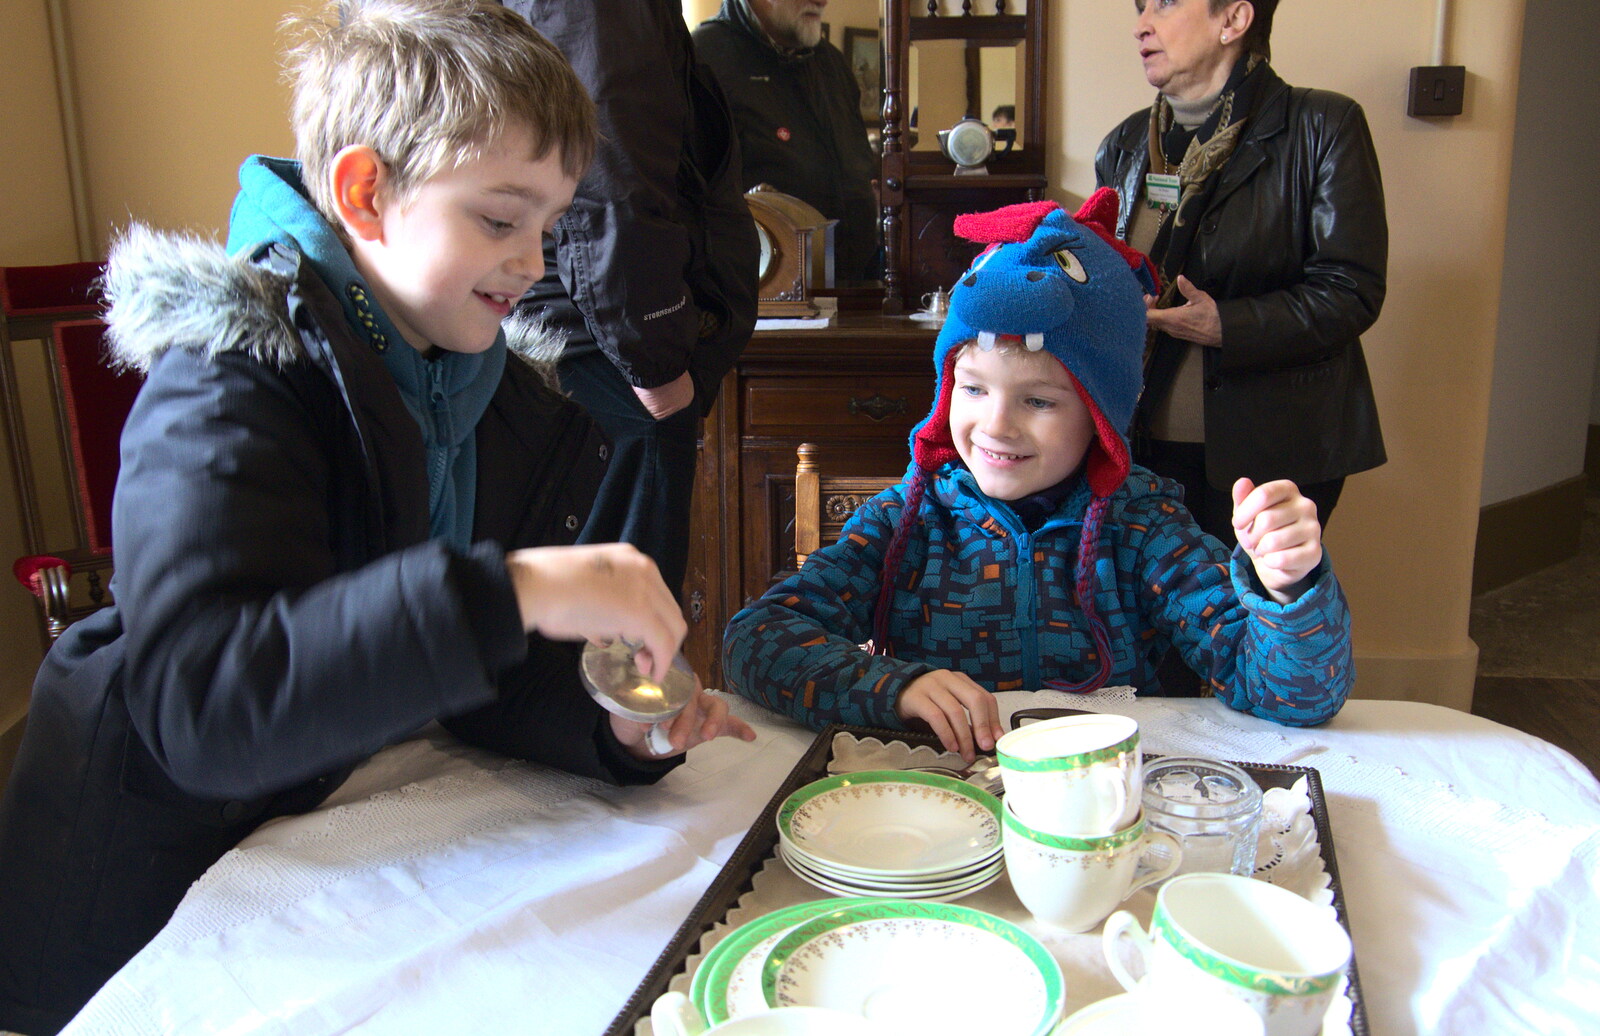 The boys have fun with some old sugar tongs from Life Below Stairs, Ickworth House, Horringer, Suffolk - 28th January 2018